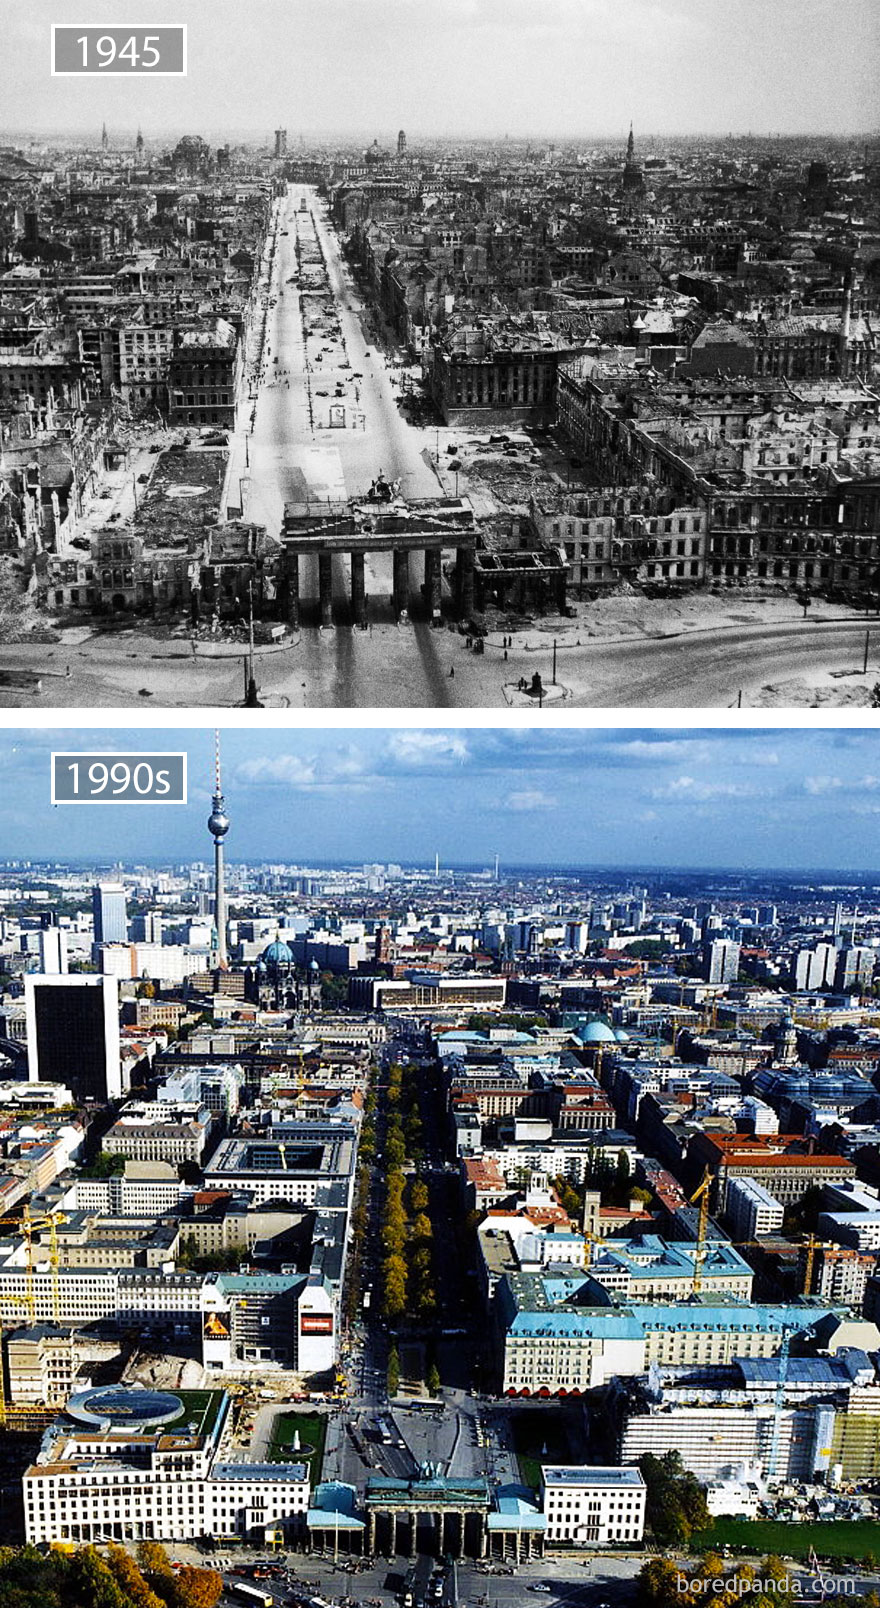 how-famous-city-changed-timelapse-evolution-before-after-30-577f568726933__880